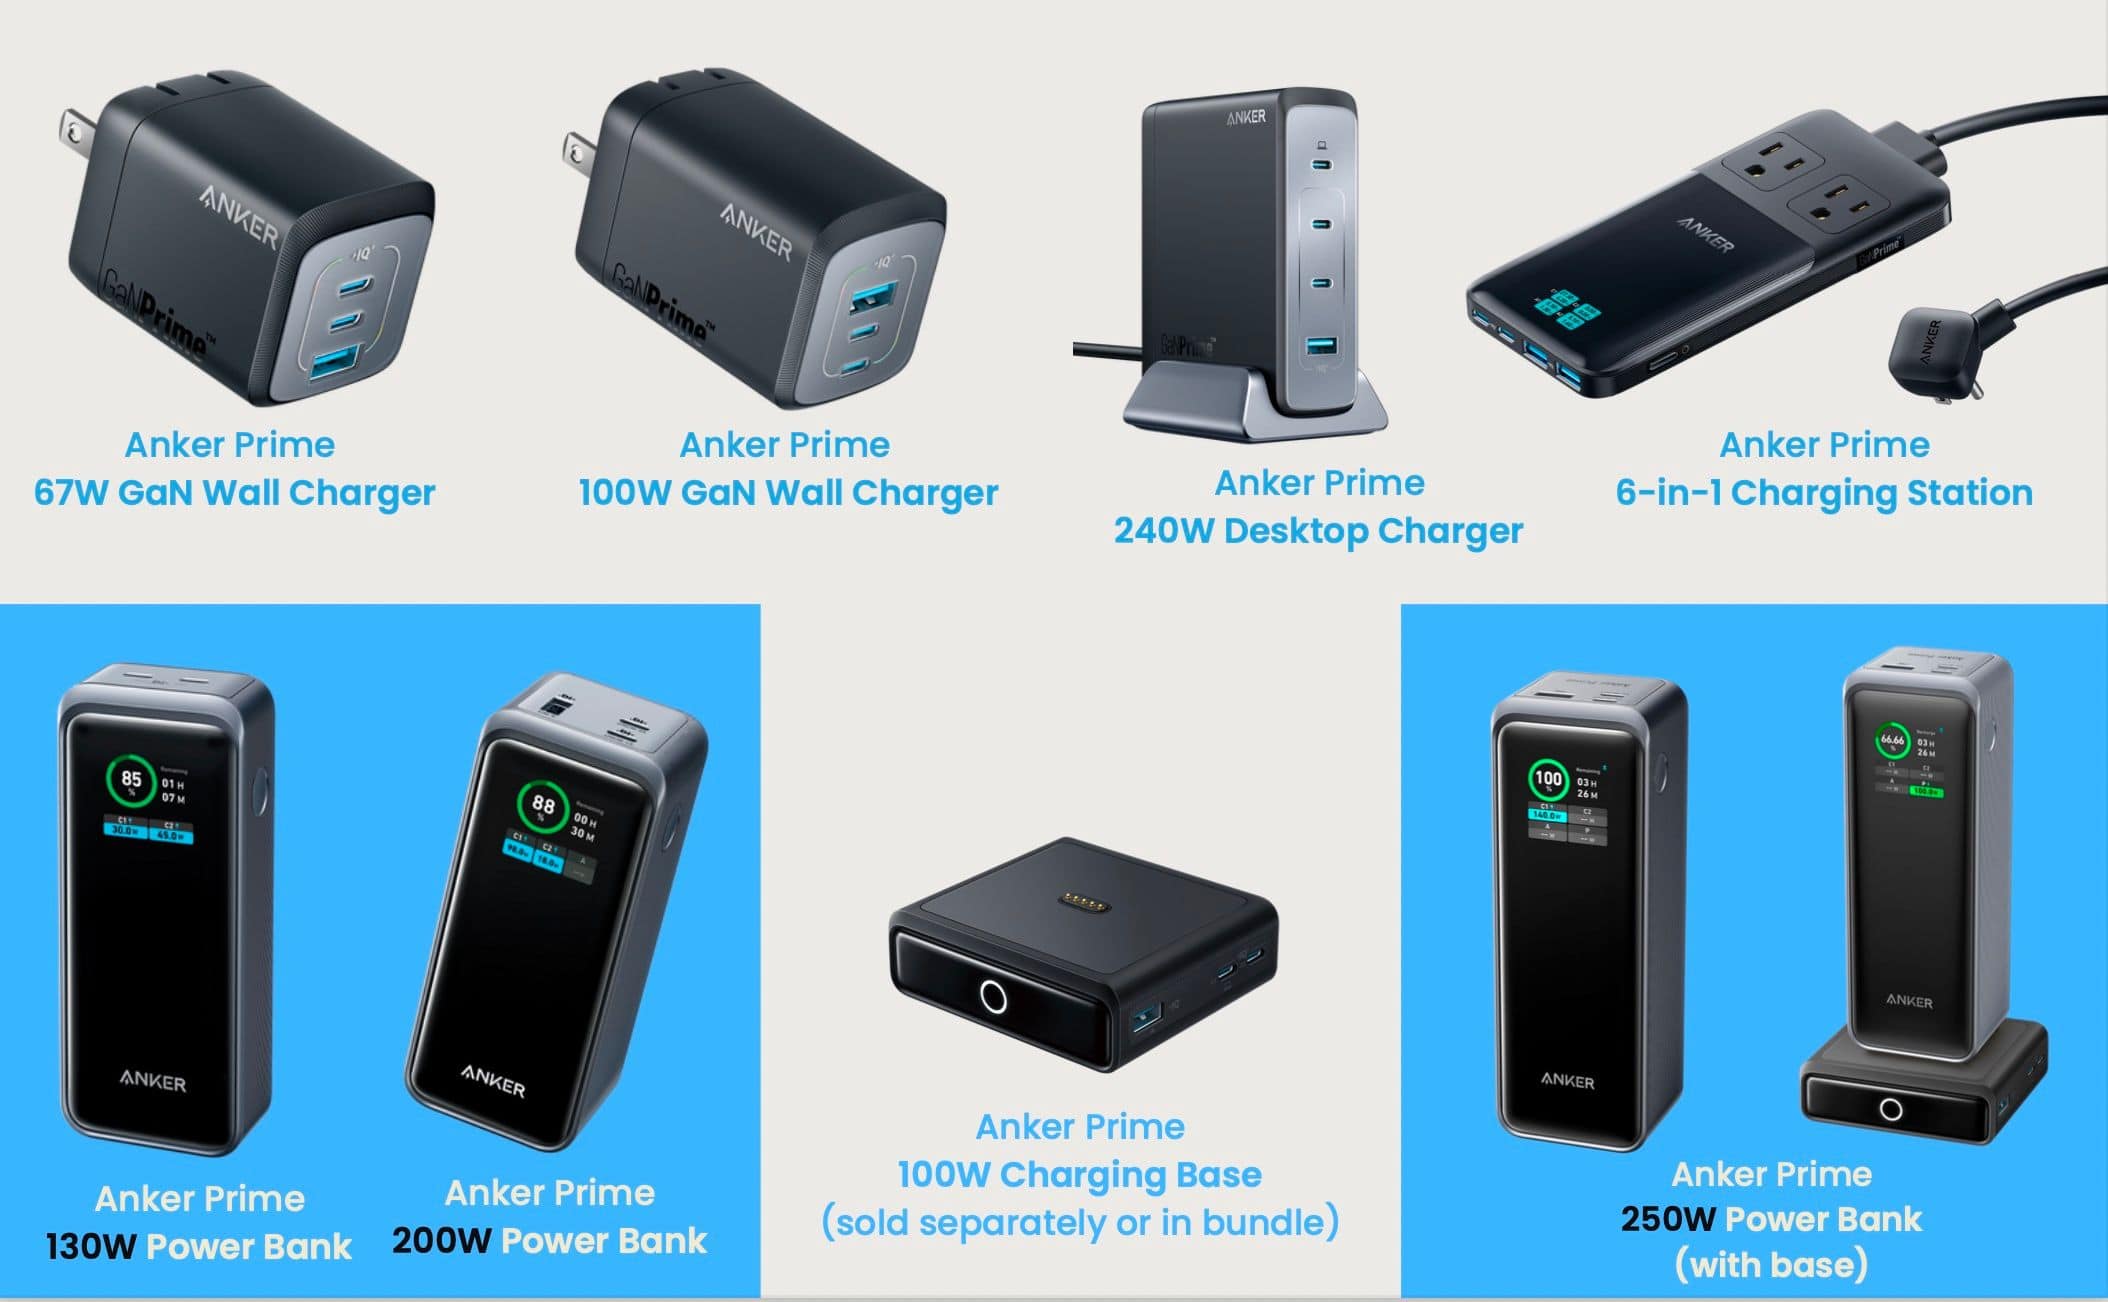 Anker unveils Prime lineup of 8 powerful multi-device chargers